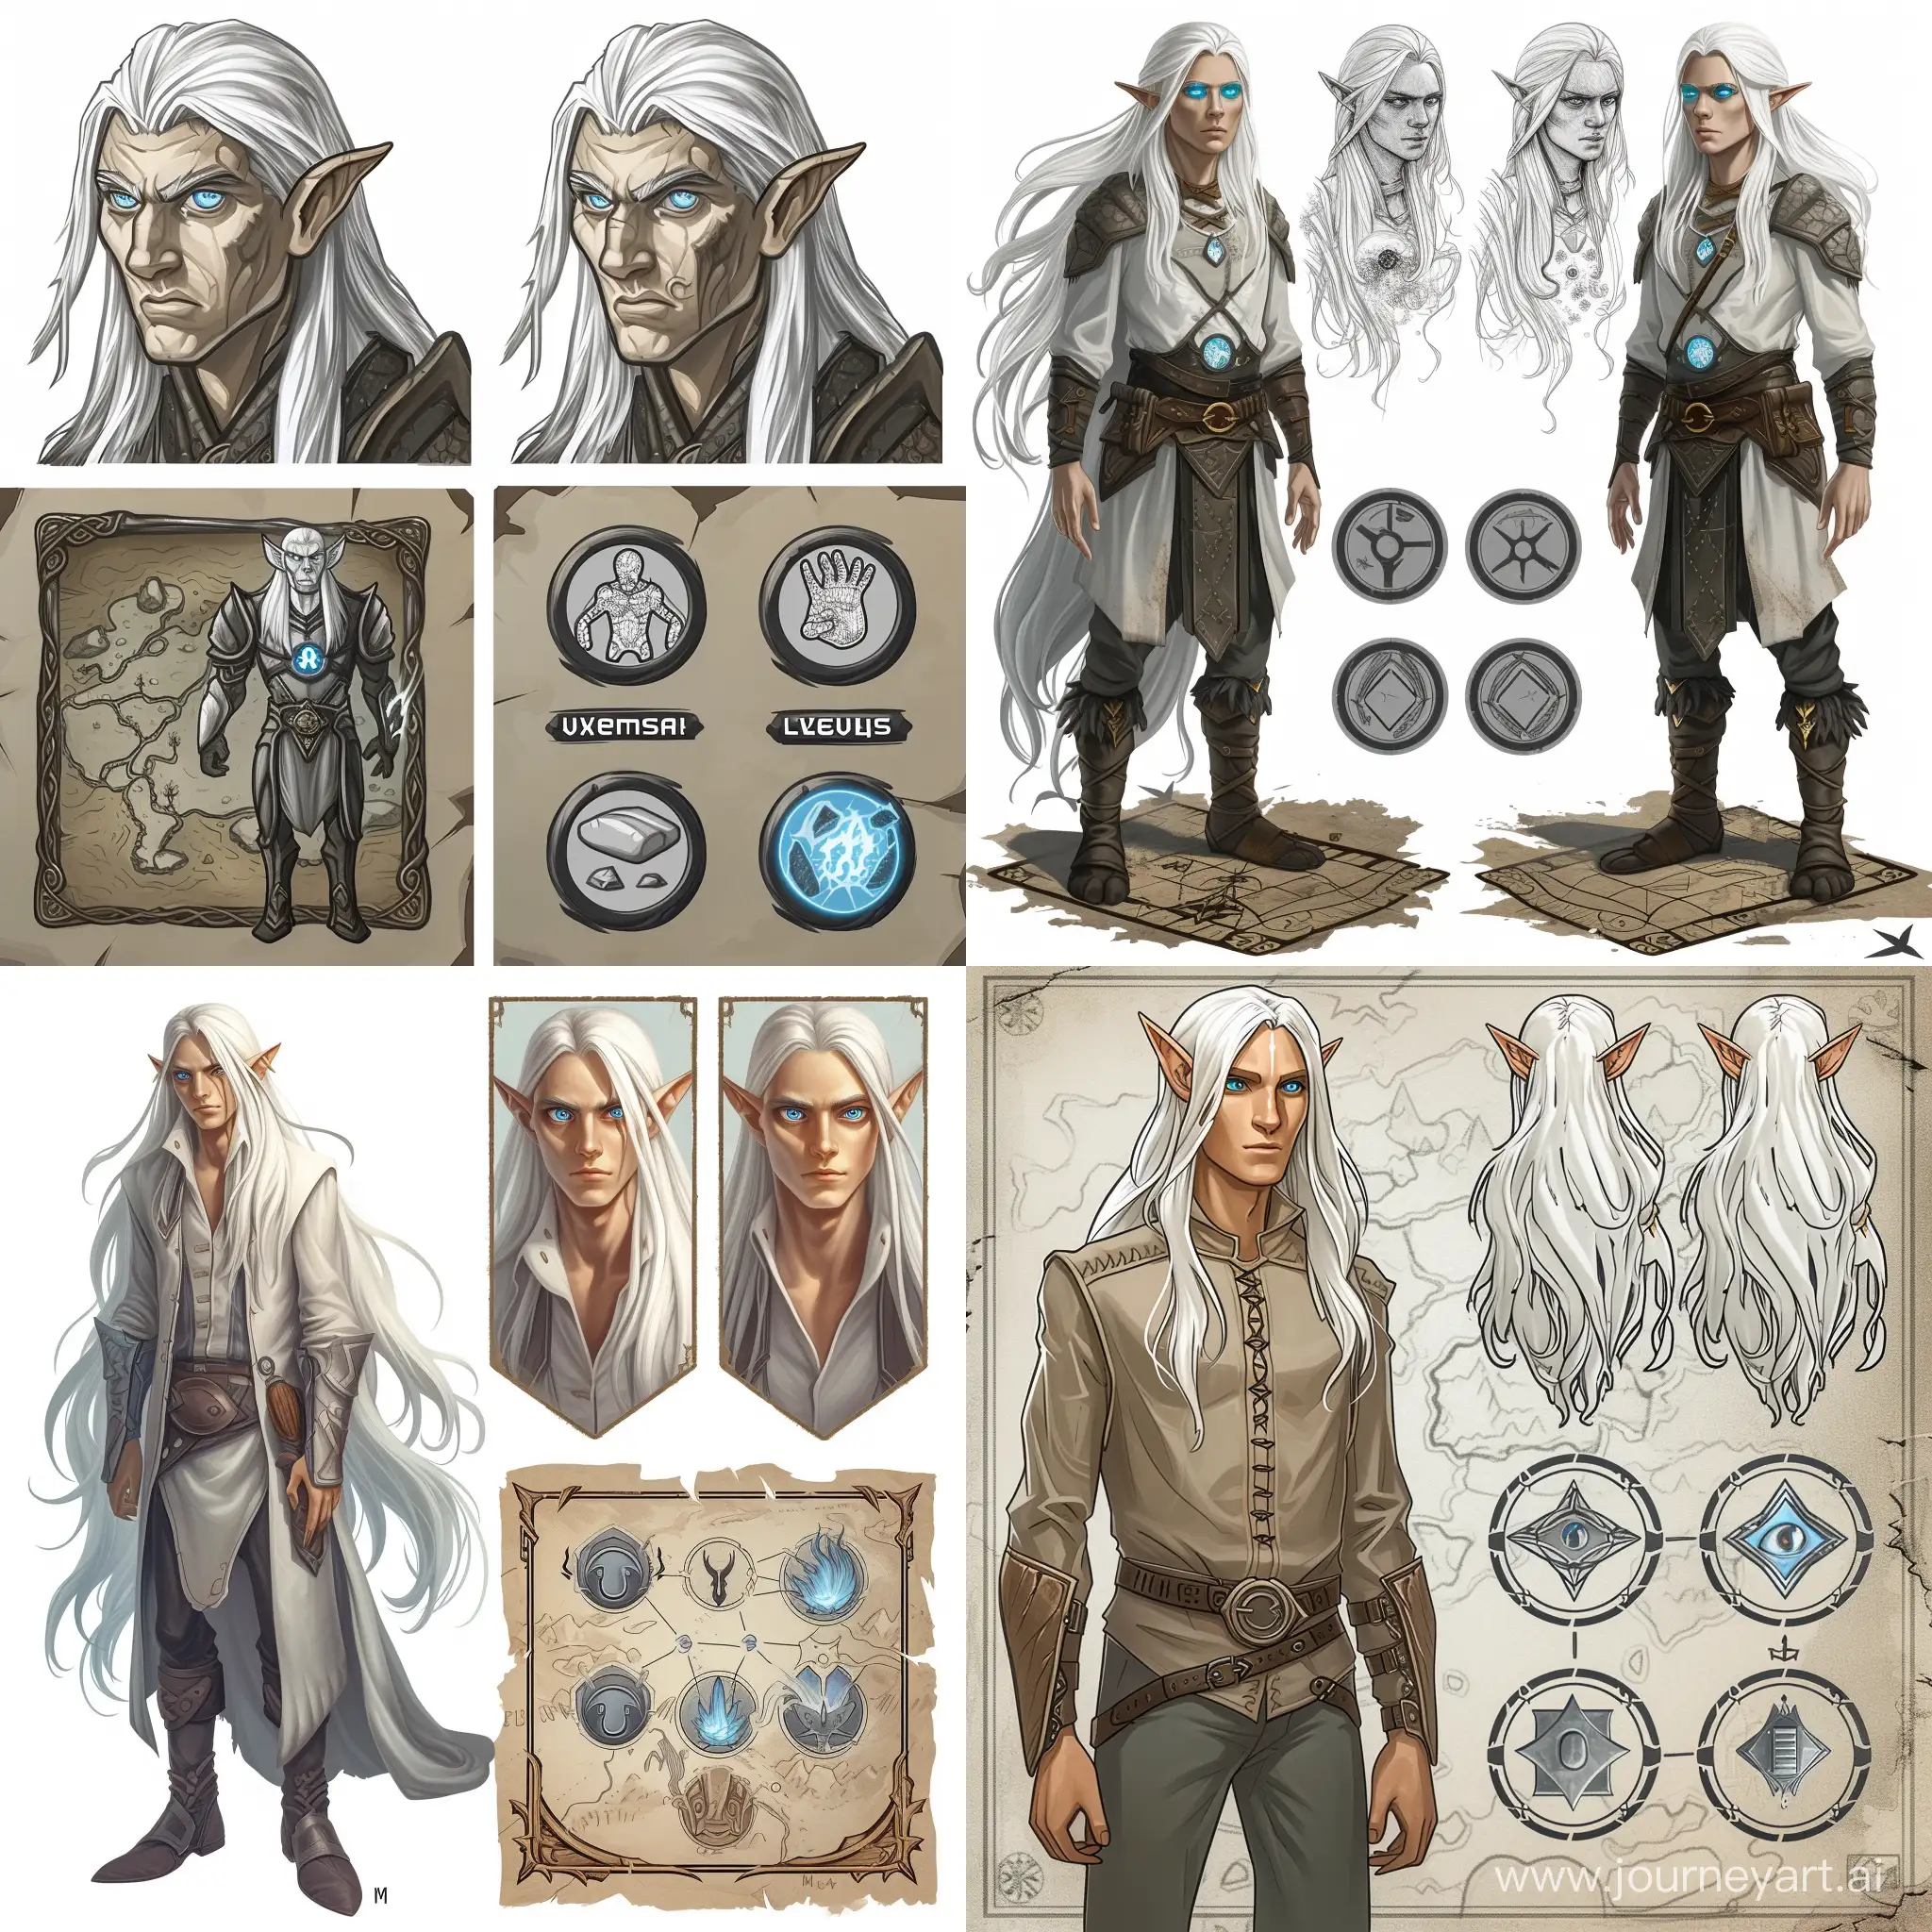 draw 4 different versions of the pictures. The game character is an elf with long white hair and blue eyes. next to the character is an icon of his super abilities of two types. unexplored, gray in color and researched, available for use. the character stands on a playing field similar to an ancient map. Draw everything in the style of hand paint